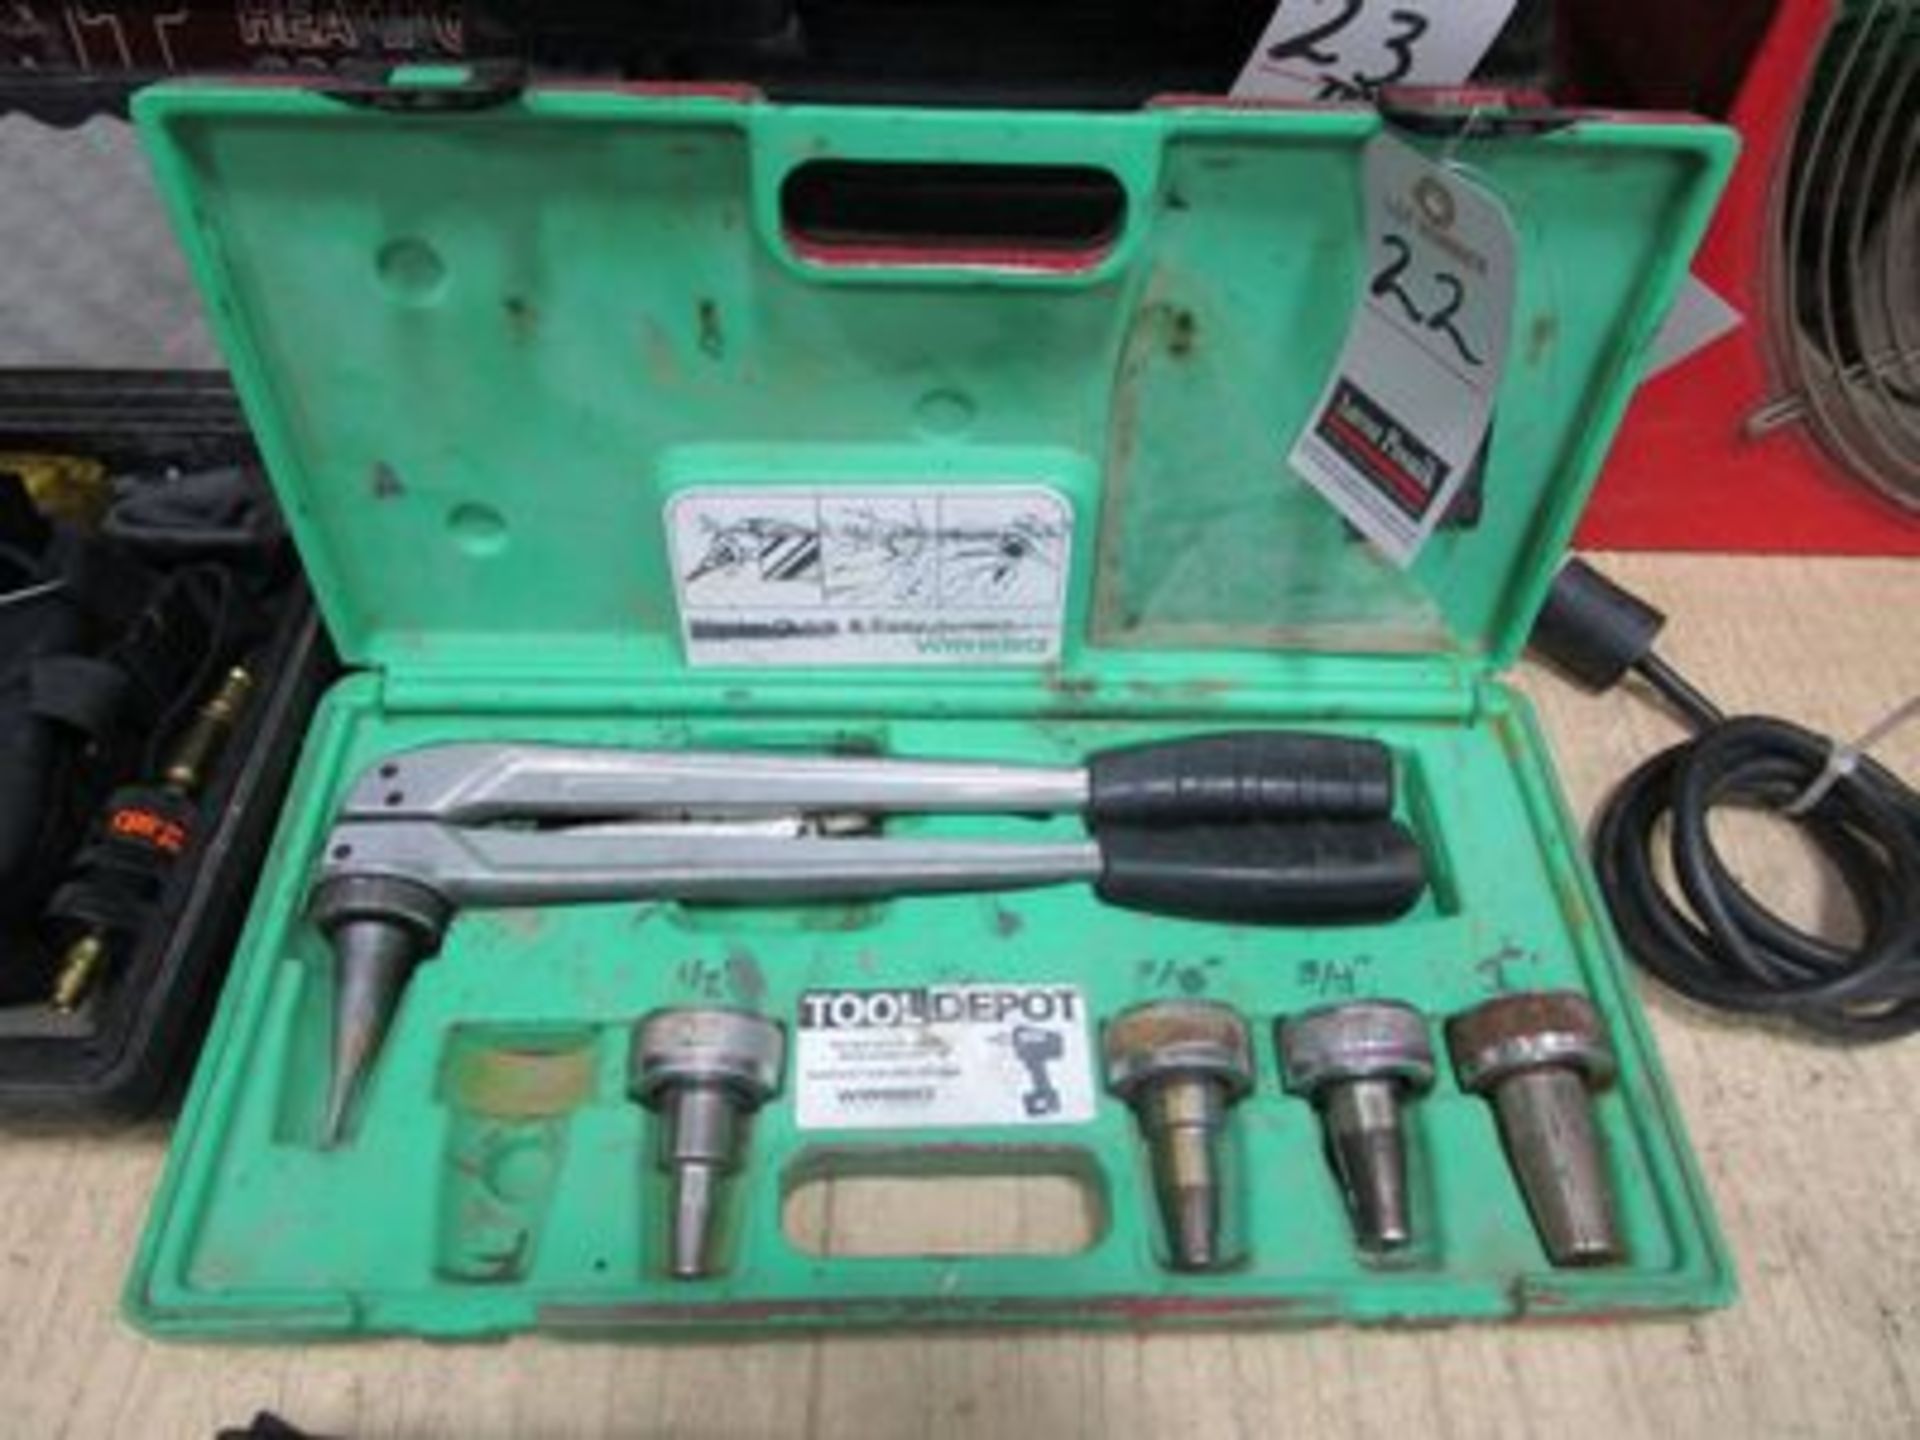 WIRSBO EXPANDER TOOL W/ CASE & ACCESSORIES